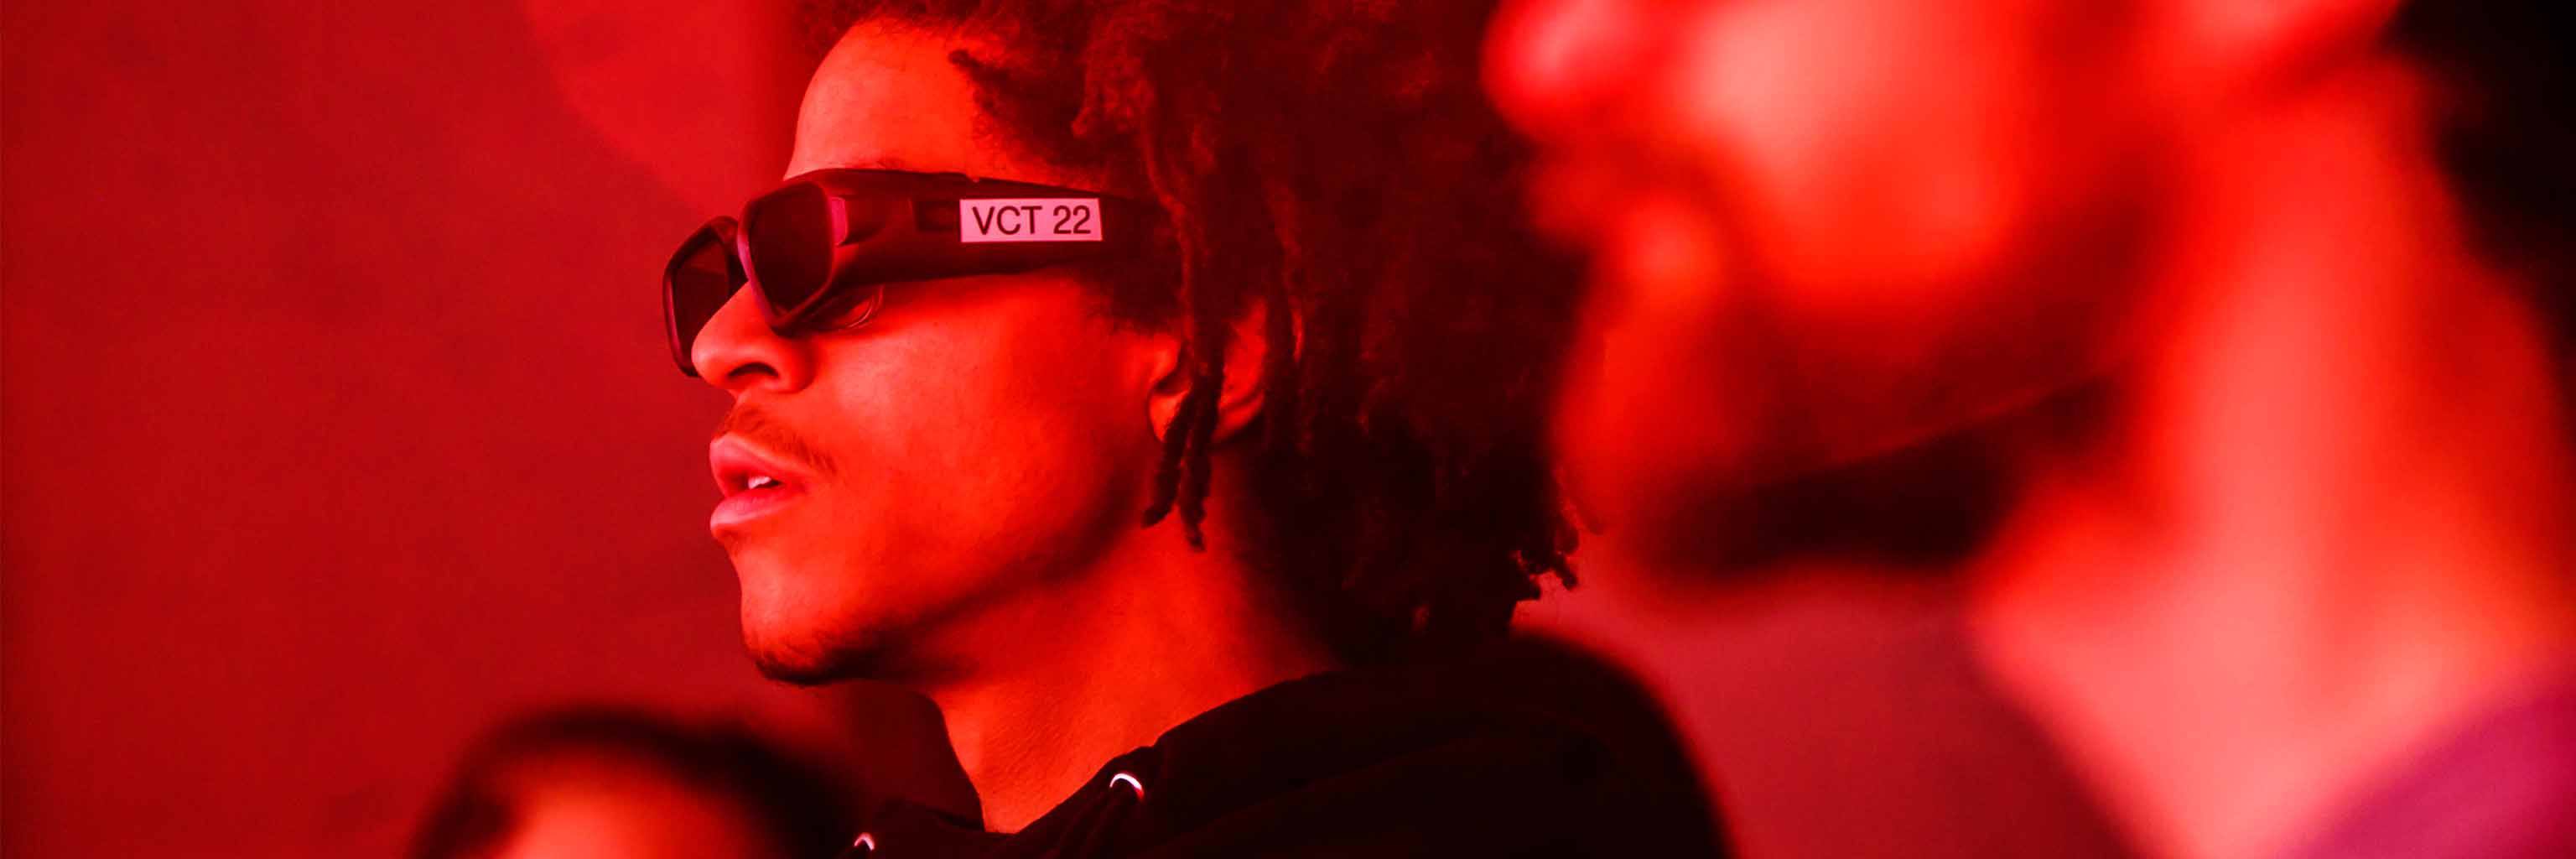 A student wears special glasses to look at something in a red-tinted room.